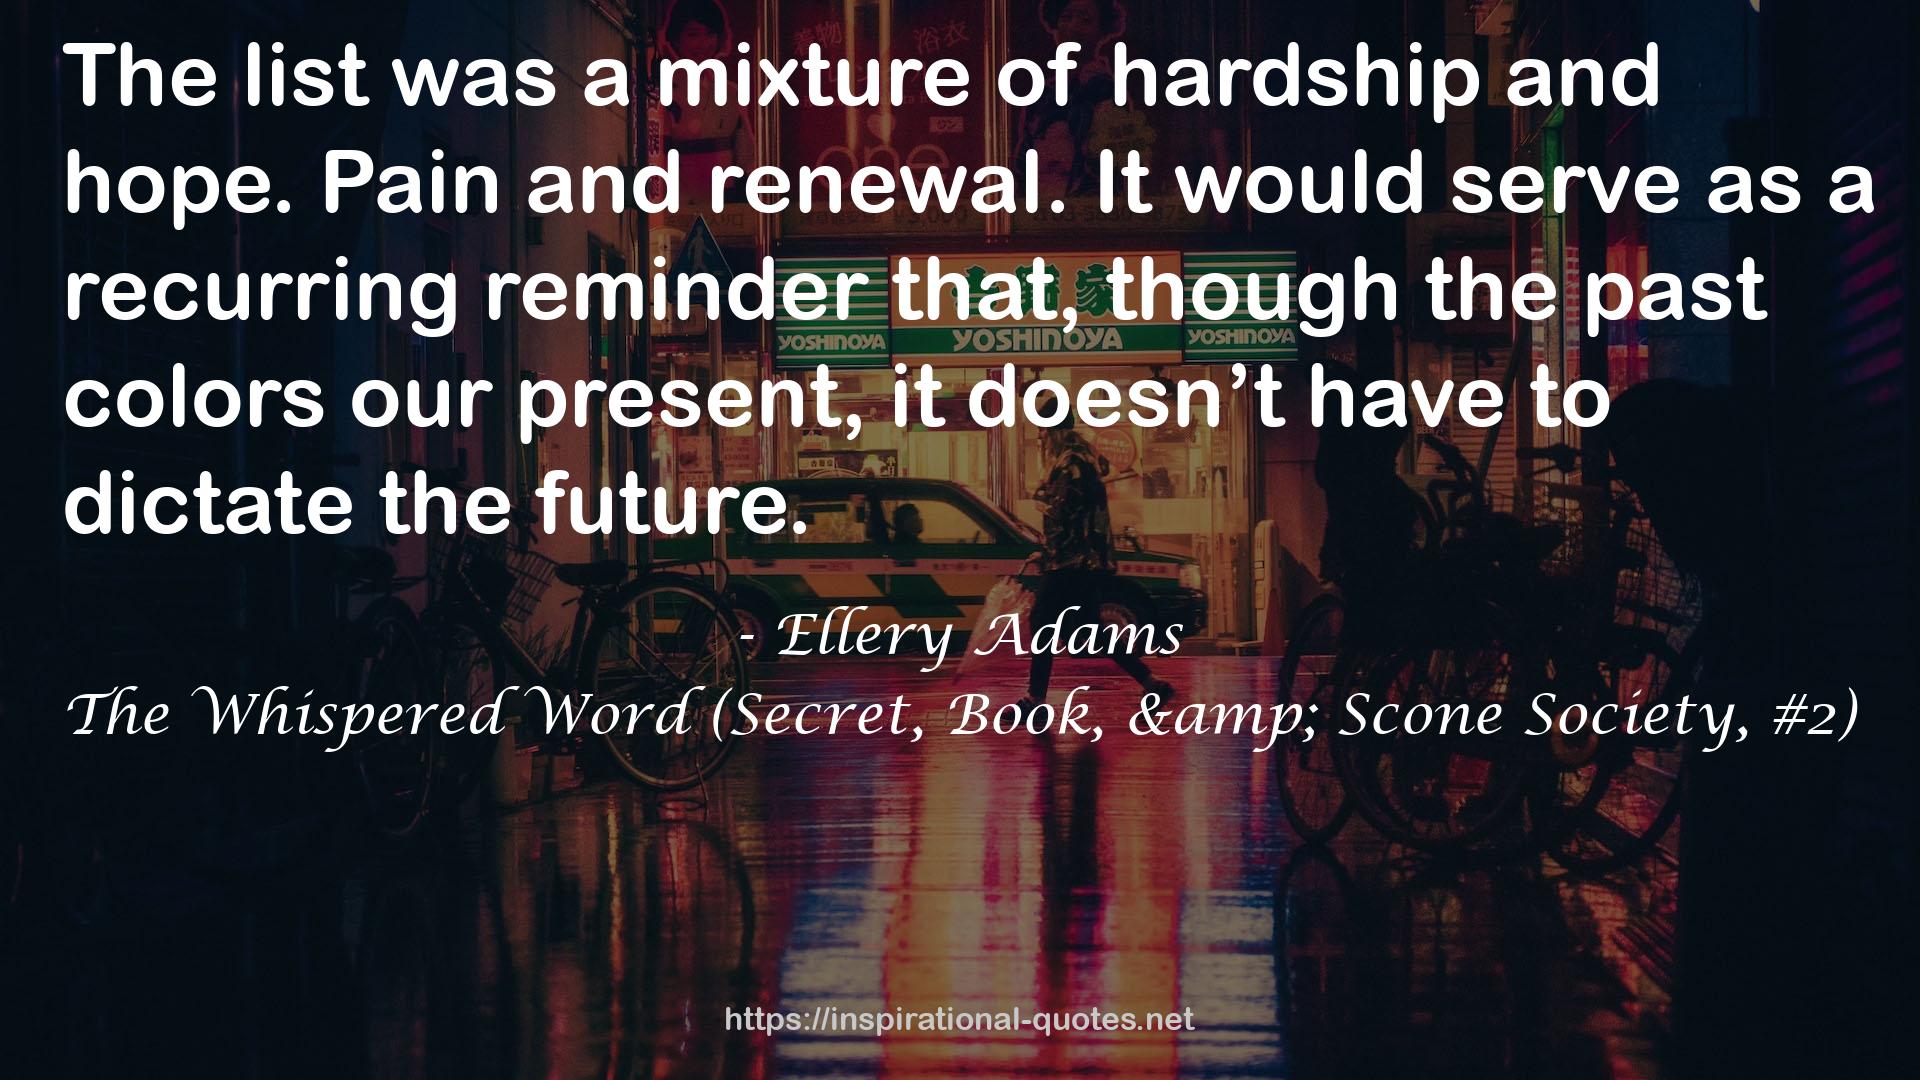 The Whispered Word (Secret, Book, & Scone Society, #2) QUOTES